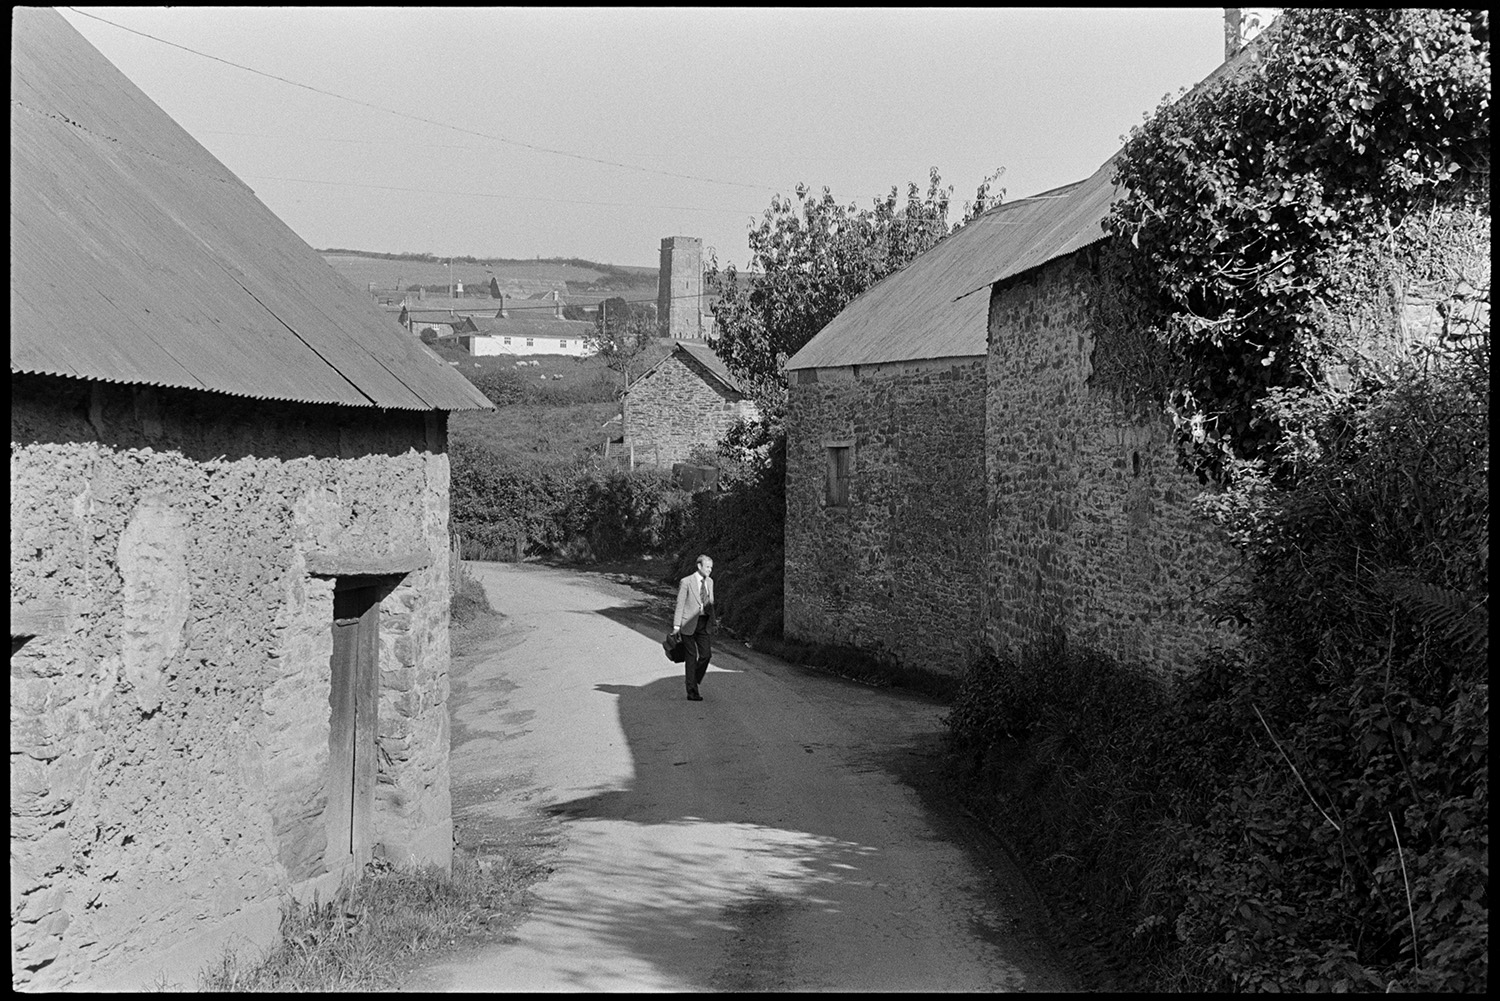 Doctor on his round in village street and visiting farm. 
[Doctor Richard Westacott walking along a road past stone and cob barns. A church tower can be seen in the background by other houses.]